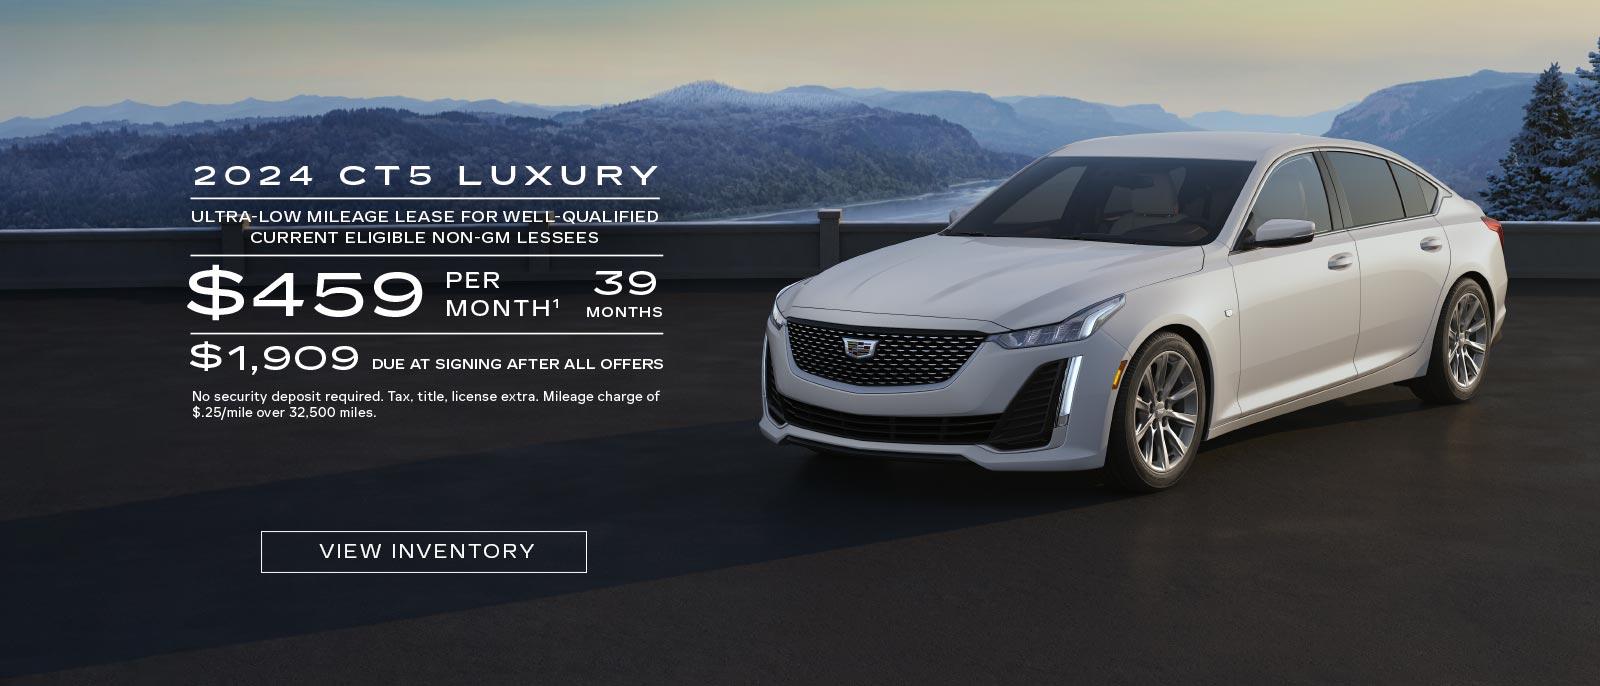 2024 CT5 Luxury. Ultra-low mileage lease for well-qualified current eligible non-GM lessees. $459 per month. 39 months. $1,909 due at signing after all offers.